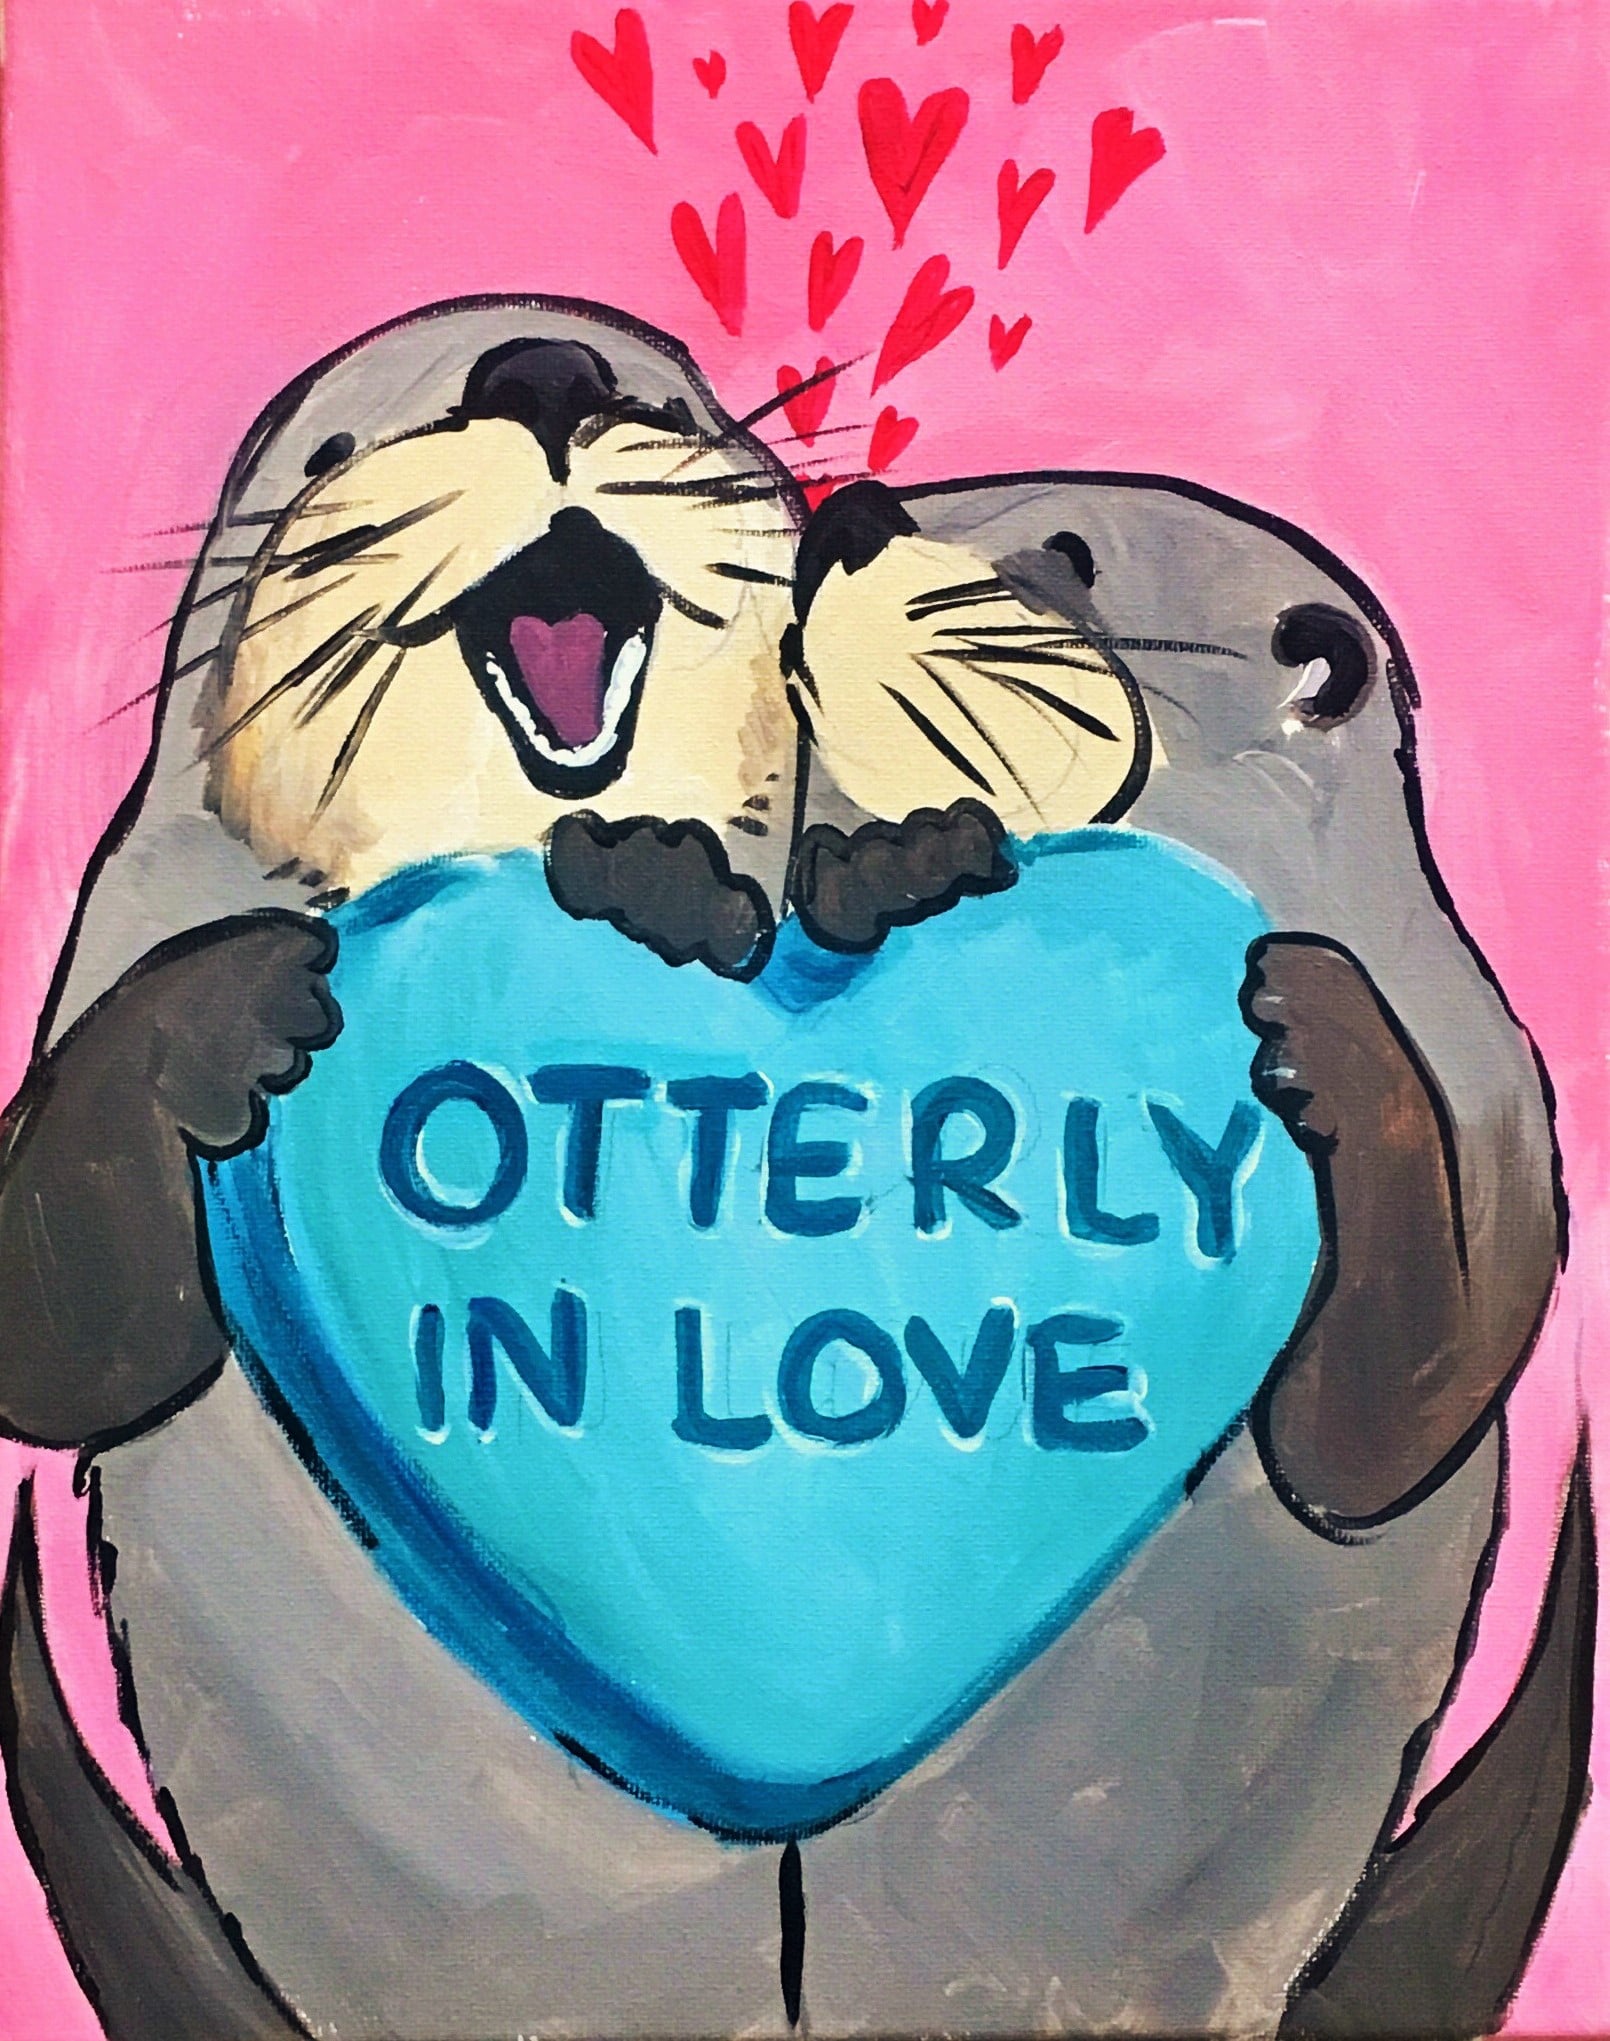 Looking for painting ideas for couples? Our Otterly in Love painting is great for couples!